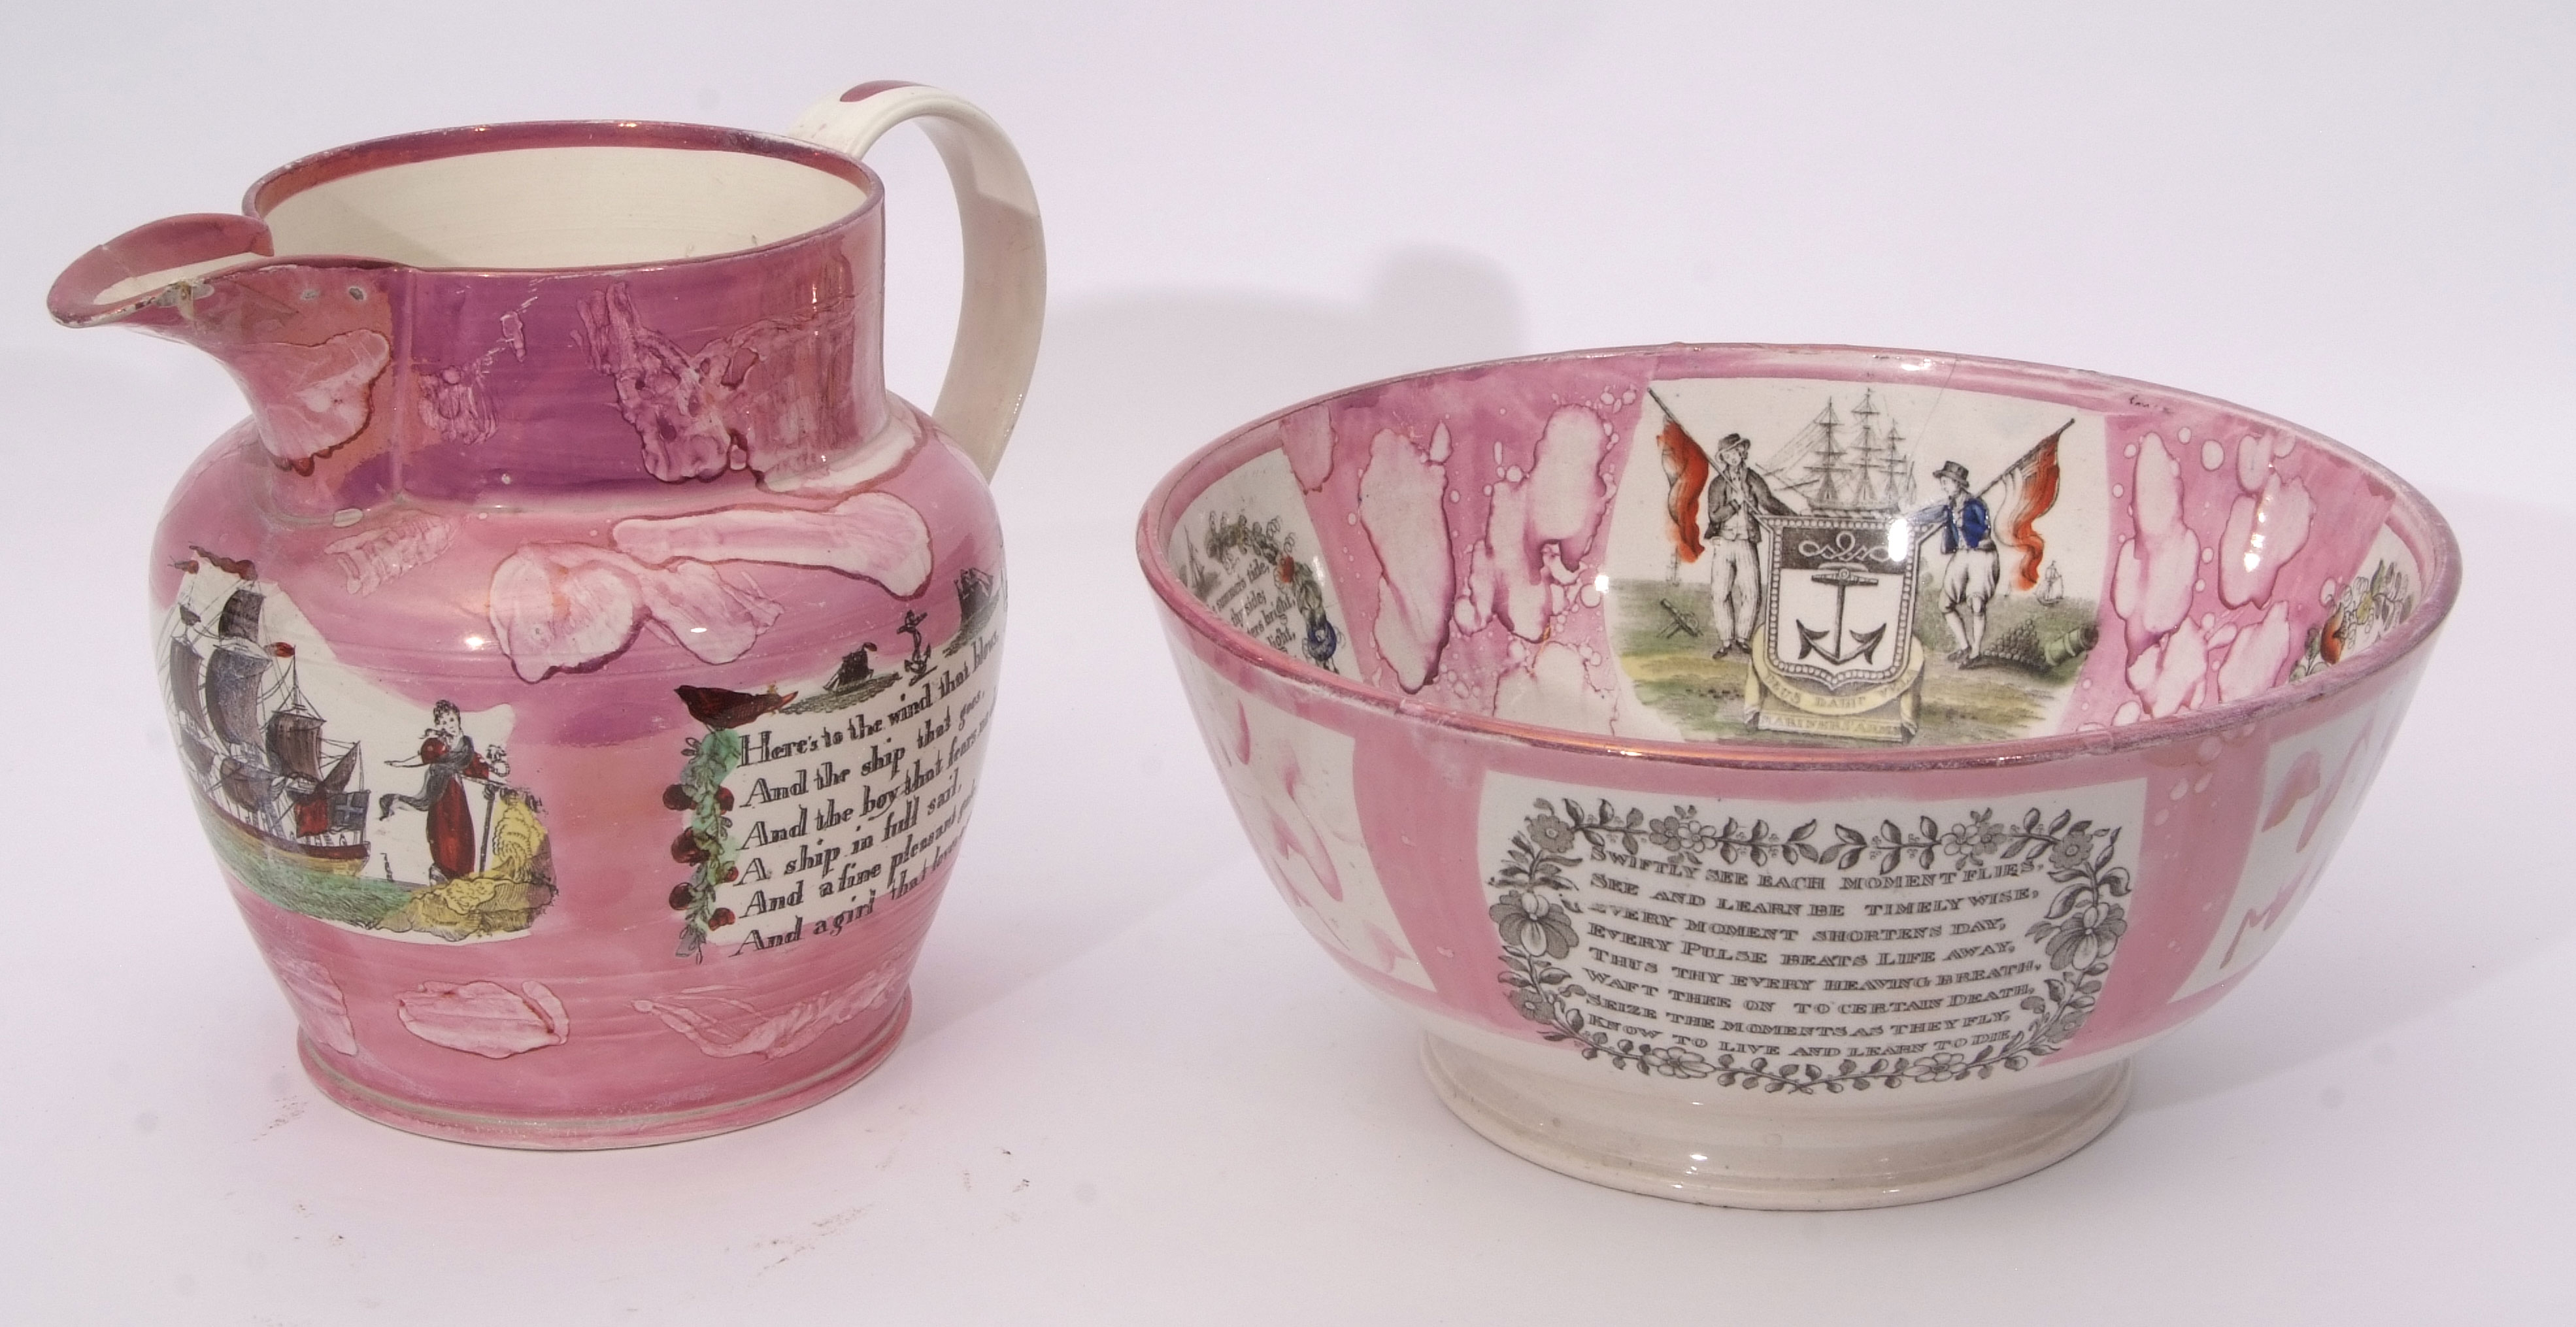 Sunderland lustre jug and a large bowl, both decorated with splash pink lustre, the jug decorated - Image 5 of 5